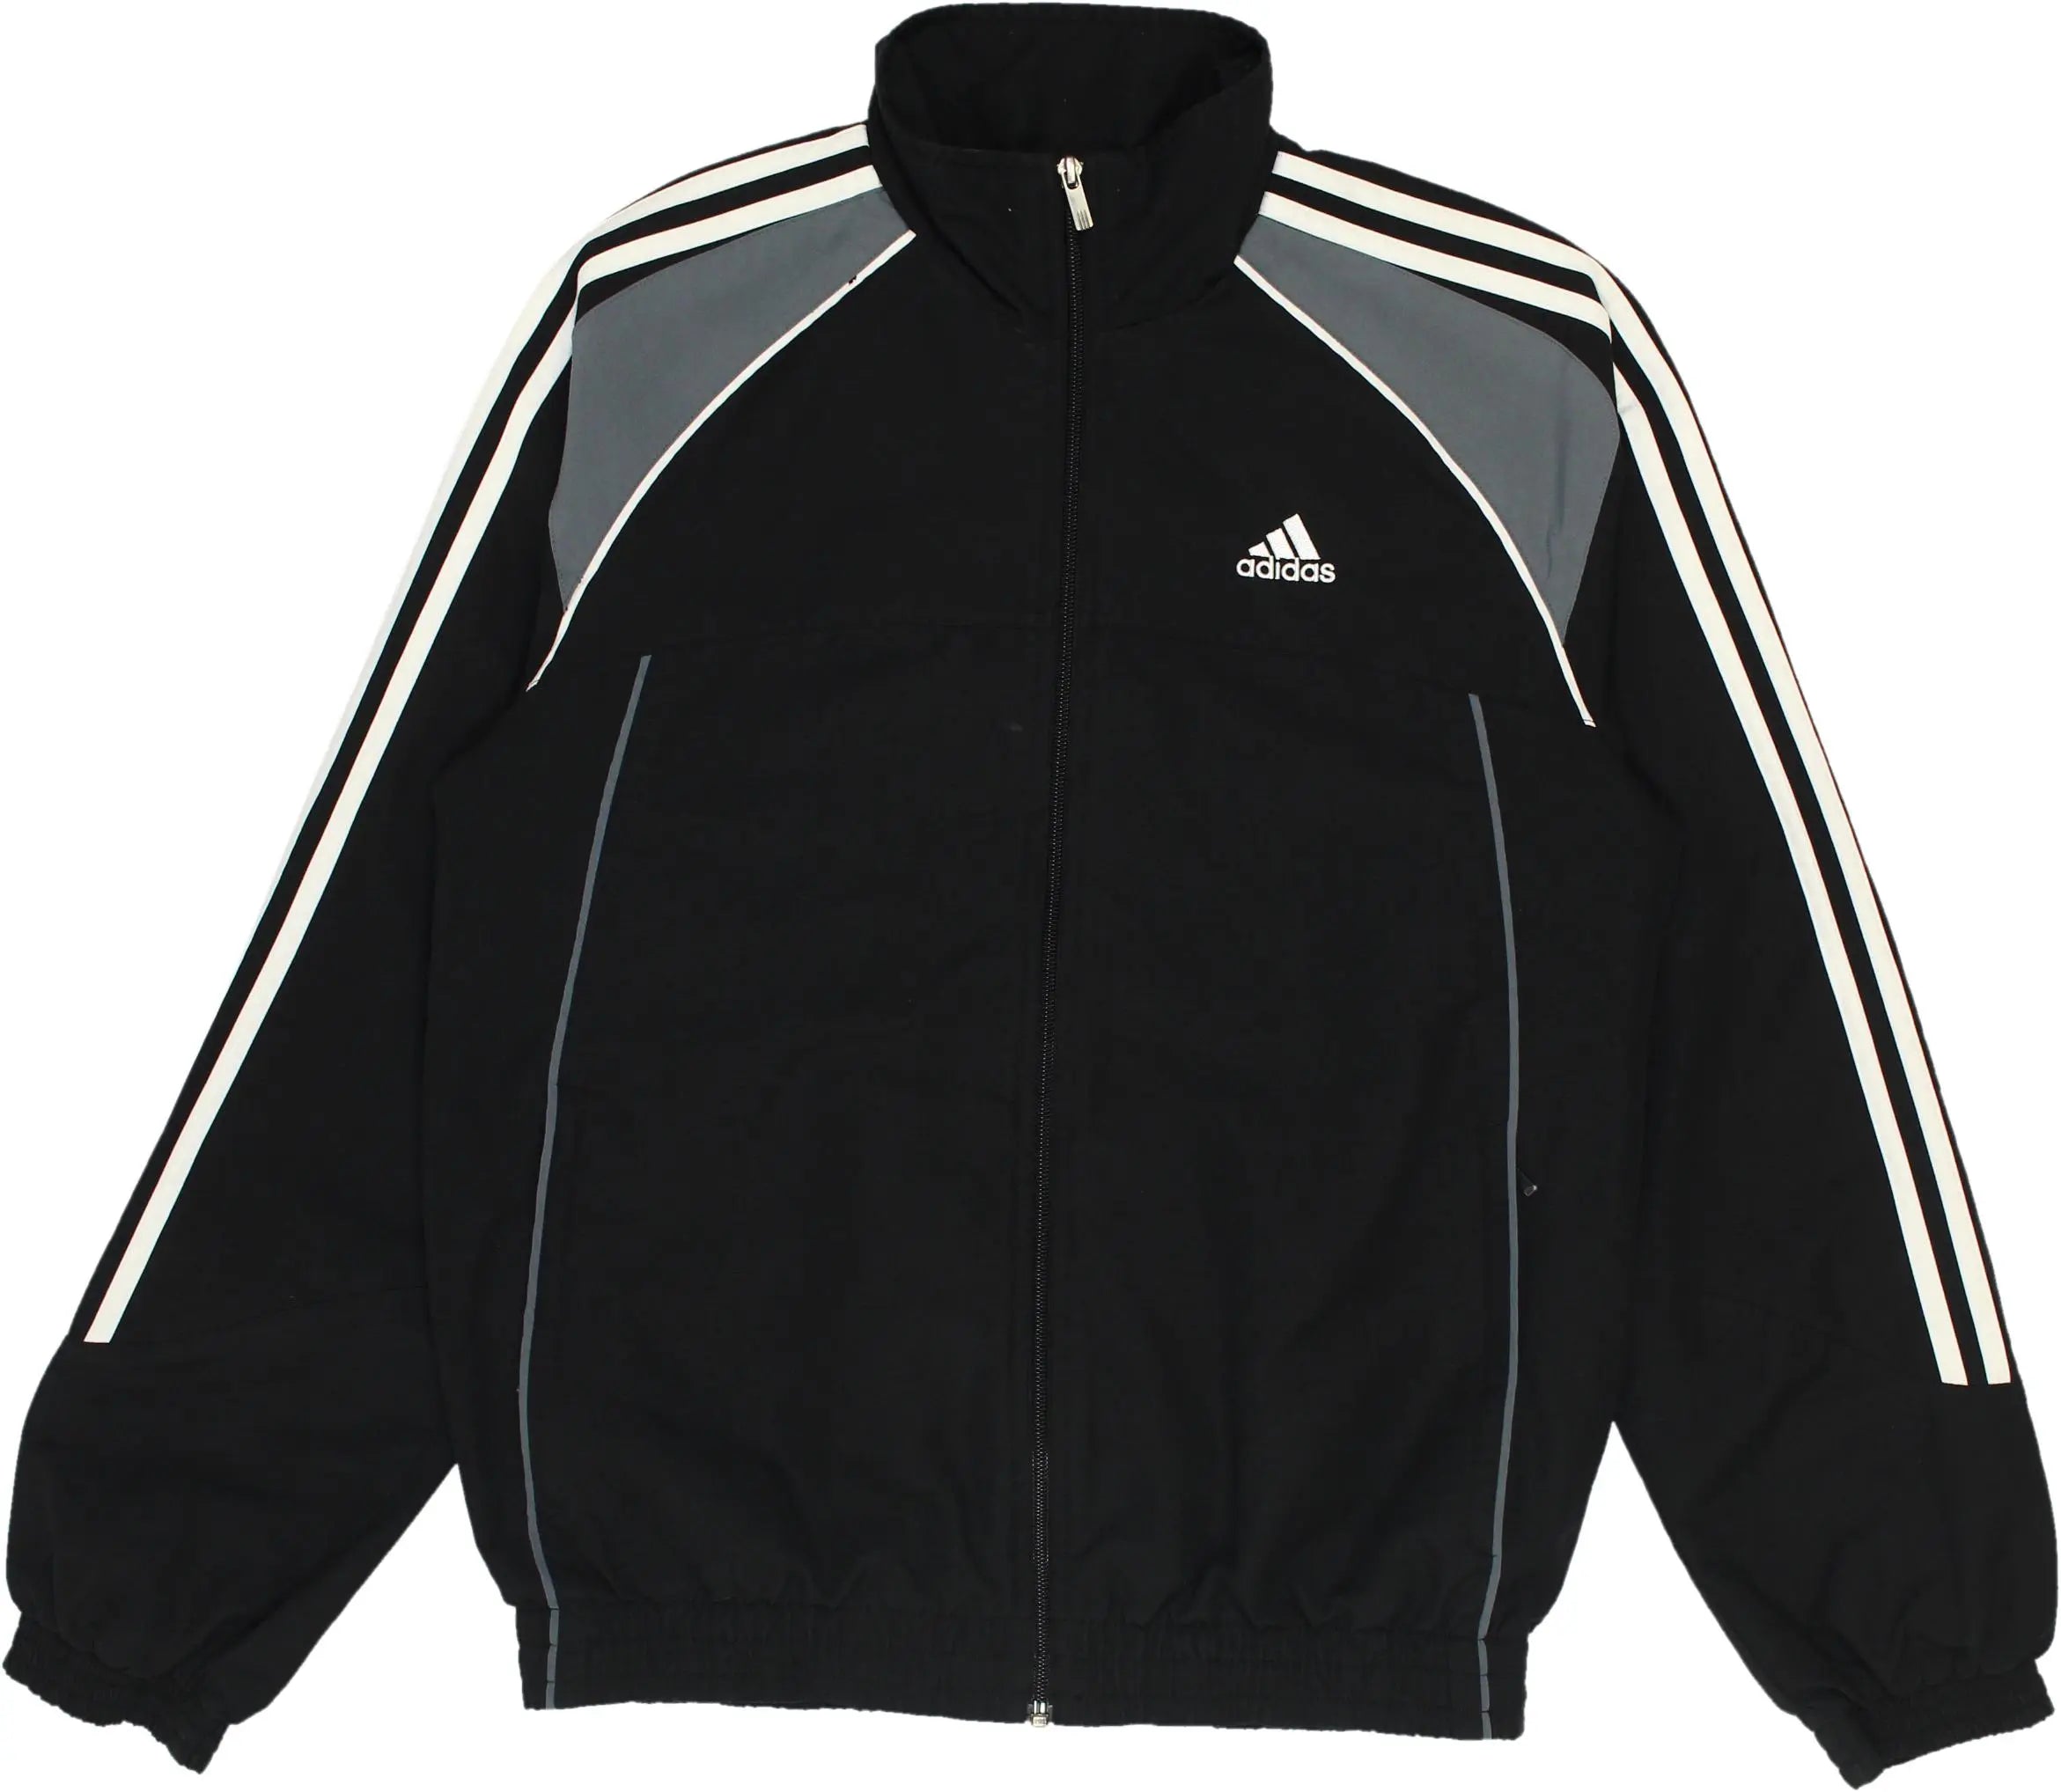 Adidas - Black Track Jacket by Adidas- ThriftTale.com - Vintage and second handclothing